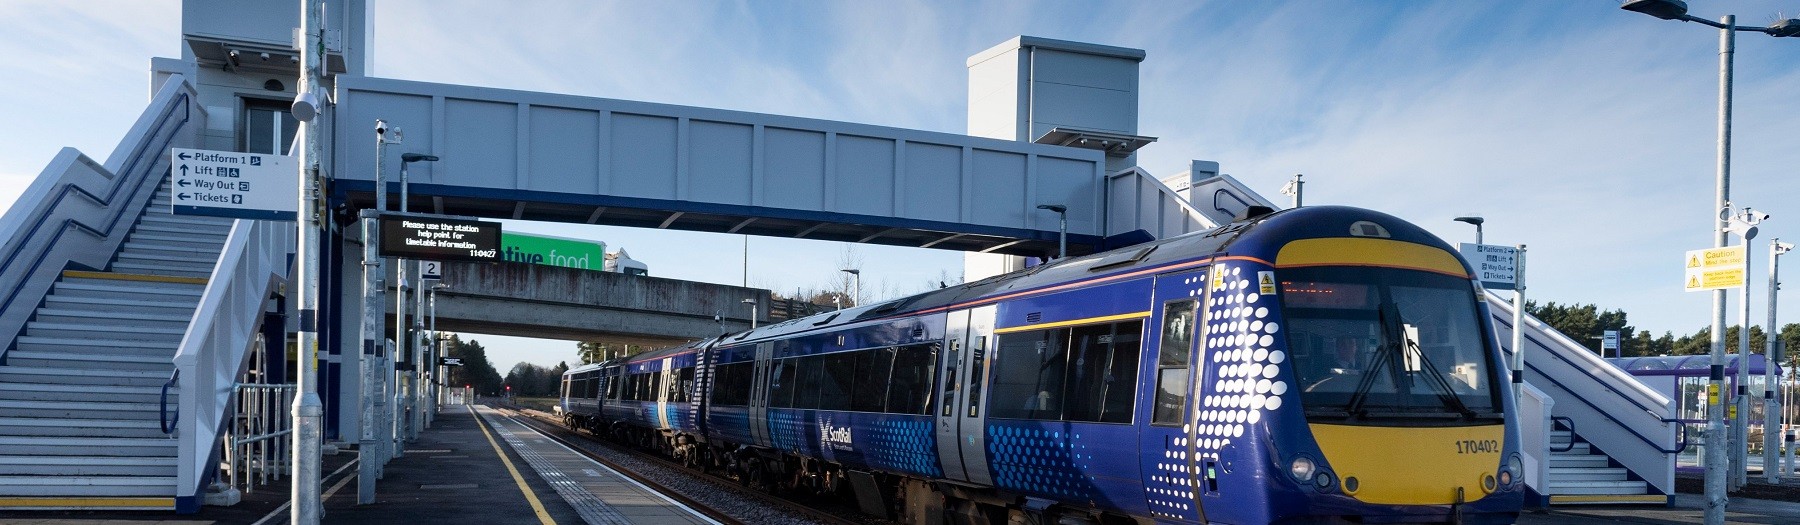 ScotRail train at Inverness Airport station